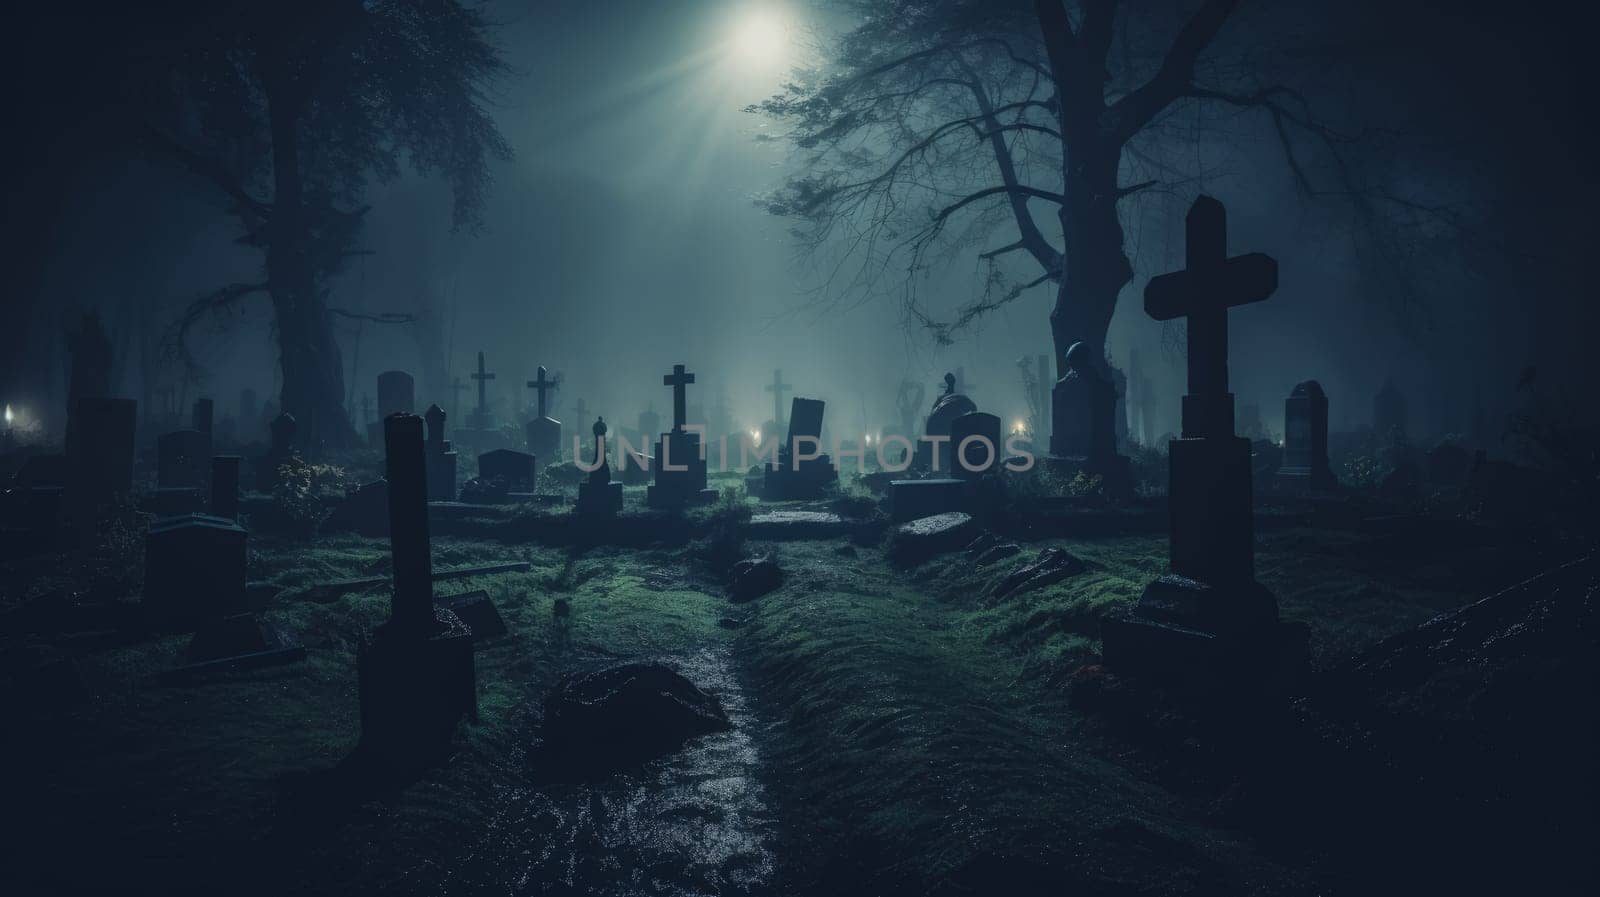 Cemetery with a darksynth vibe, the scene capturing the eerie and atmospheric nature of the graveyard under lights by Kadula